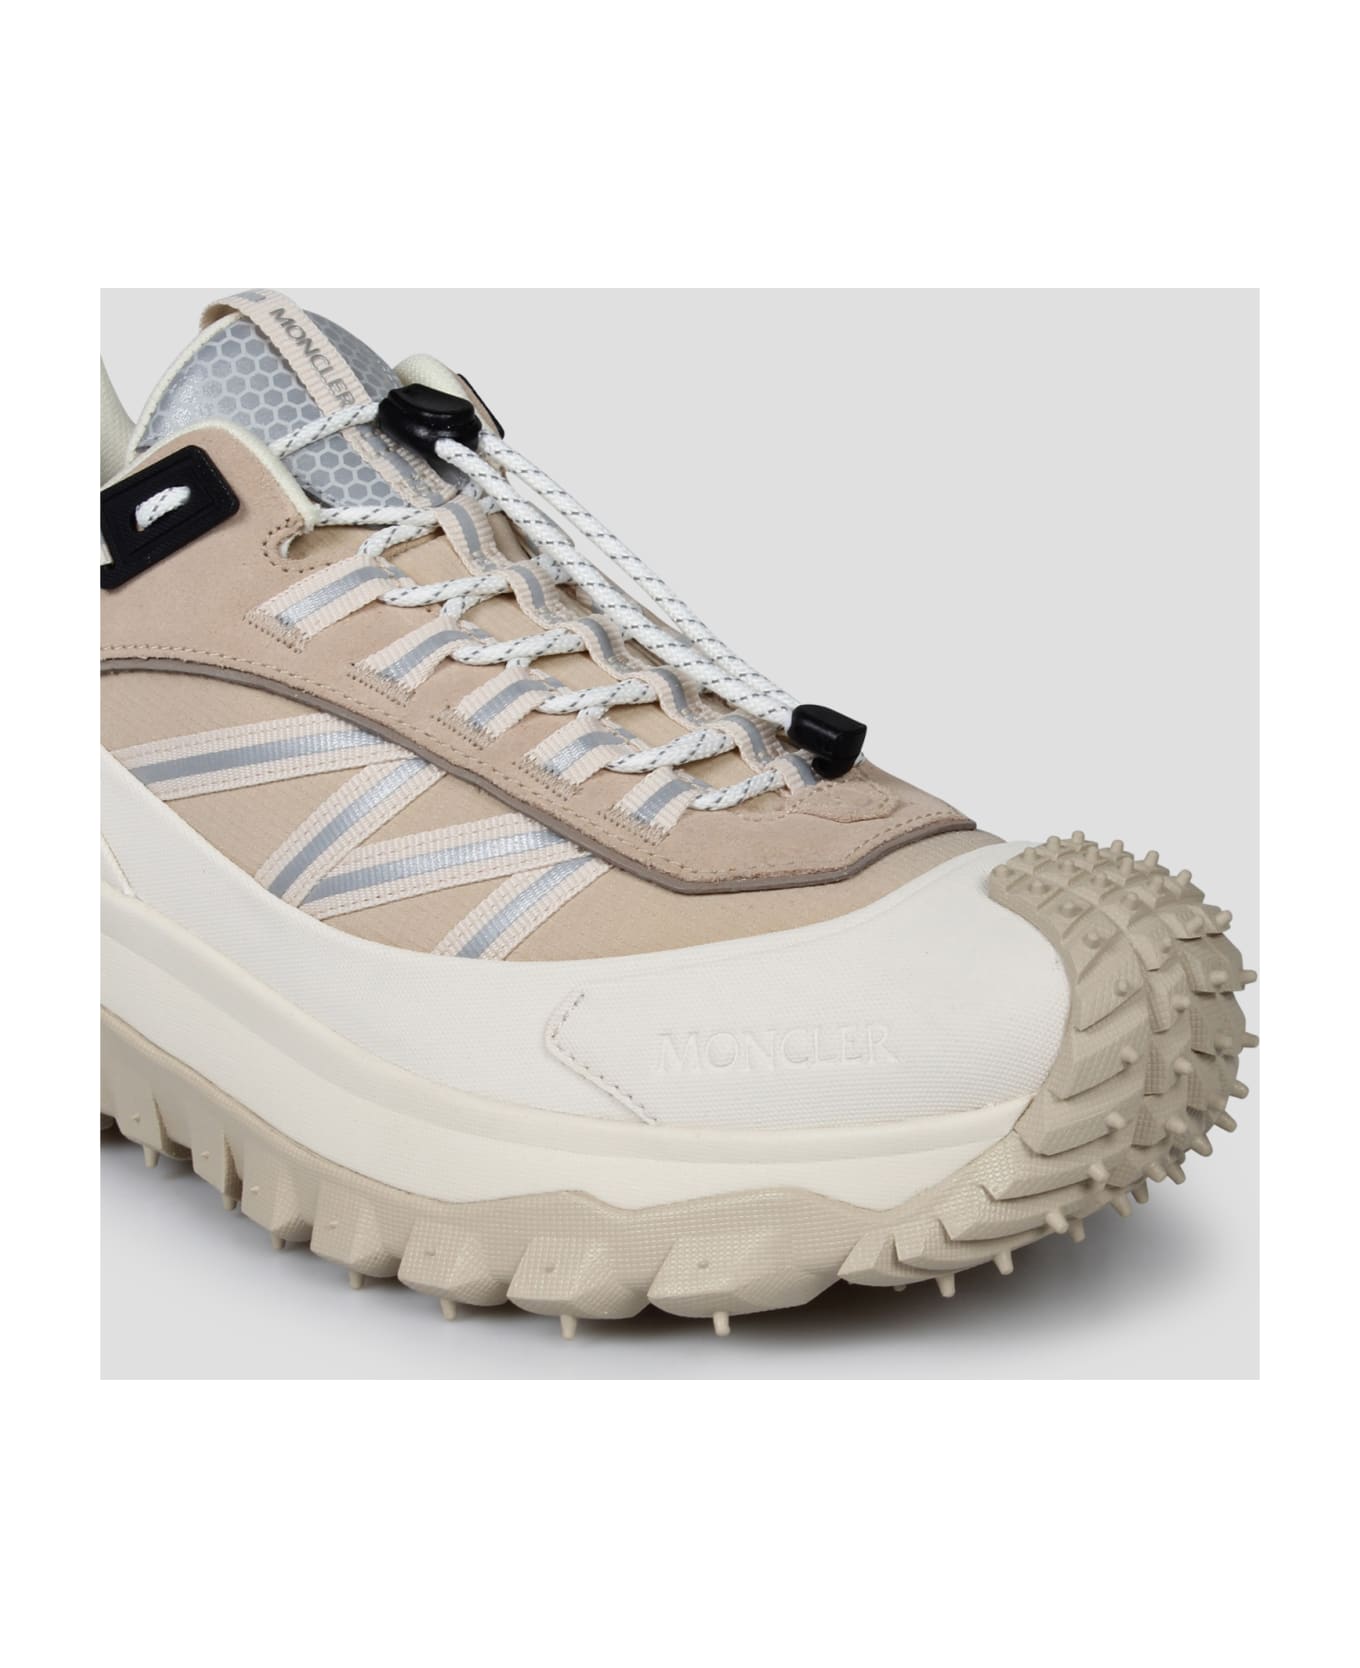 Moncler 'trailgrip' Sneakers - Nude & Neutrals スニーカー